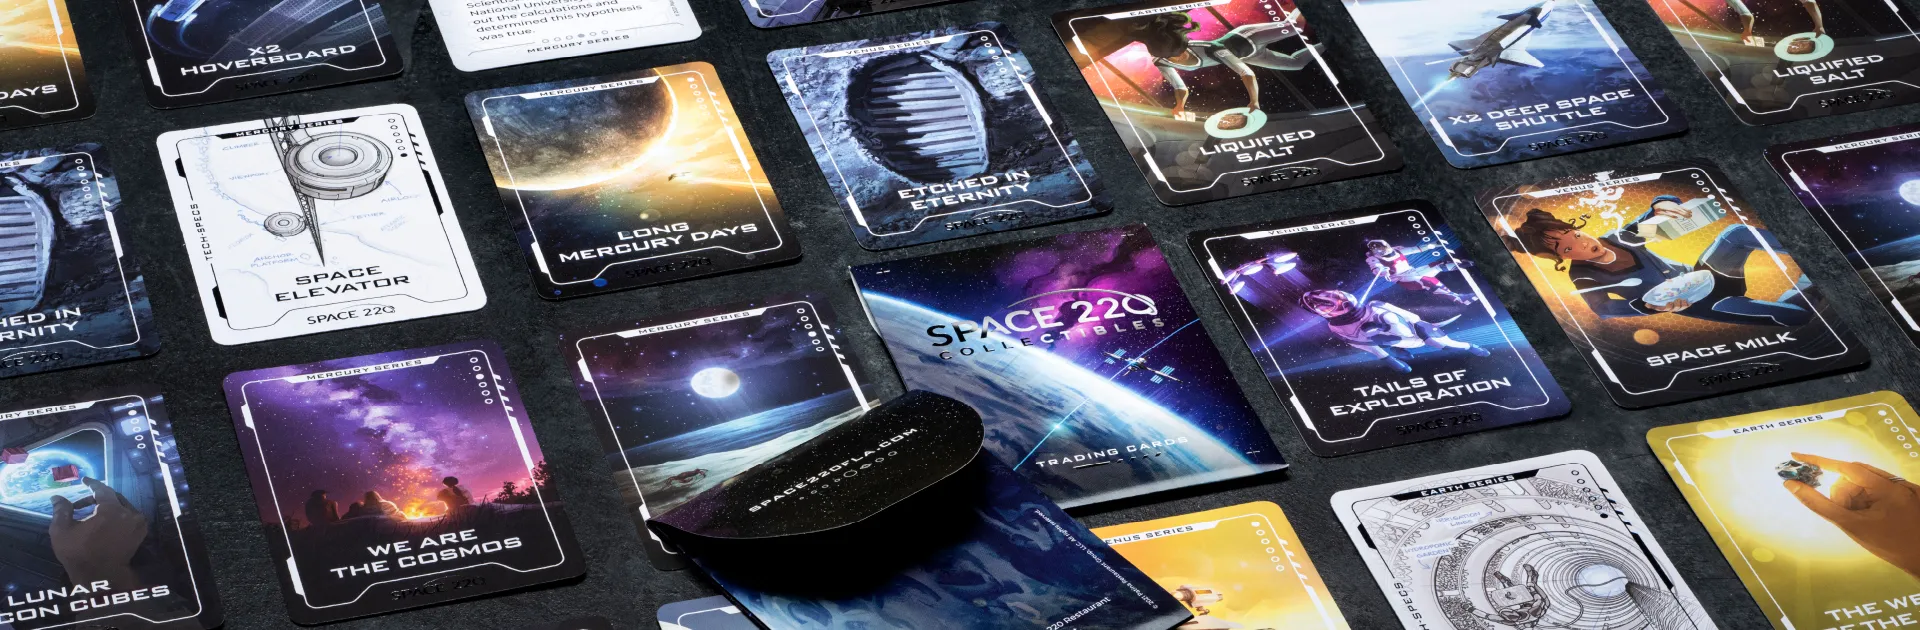 Space 220 trading cards laying on a table with a deck laying across.